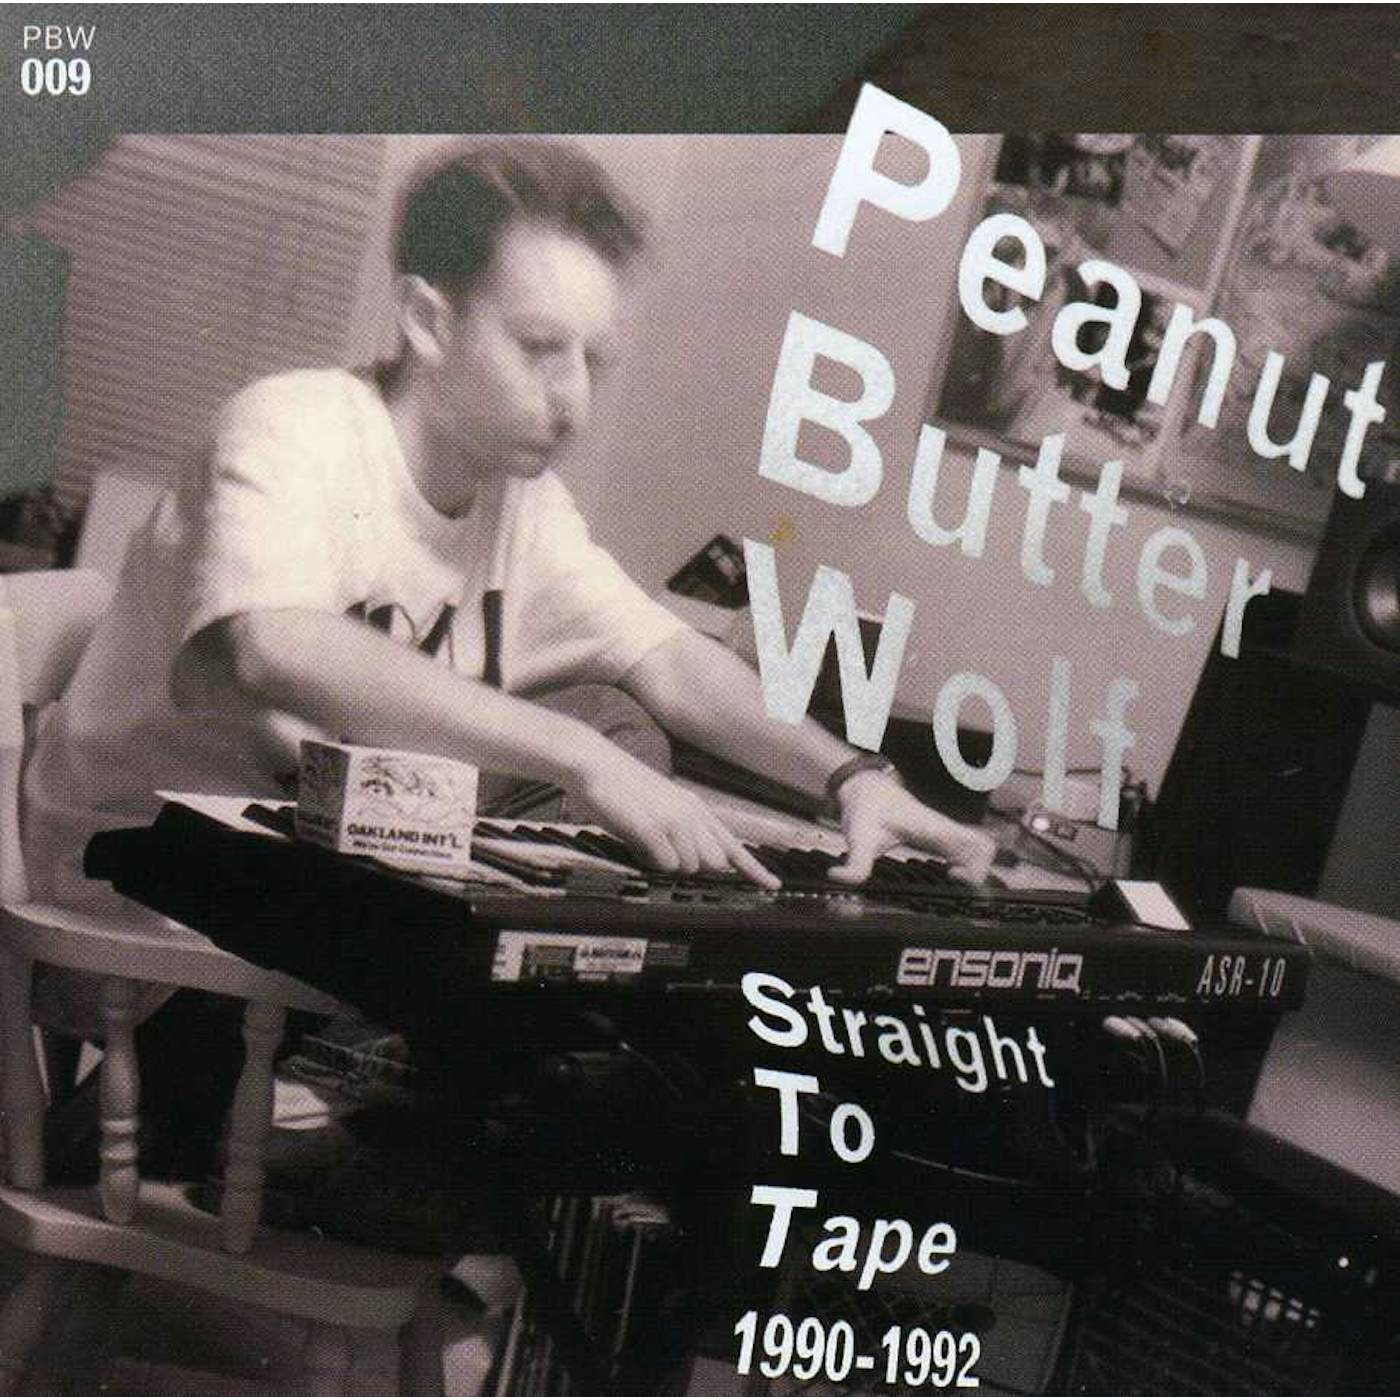 Peanut Butter Wolf STRAIGHT TO TAPE 1990-1992 CD